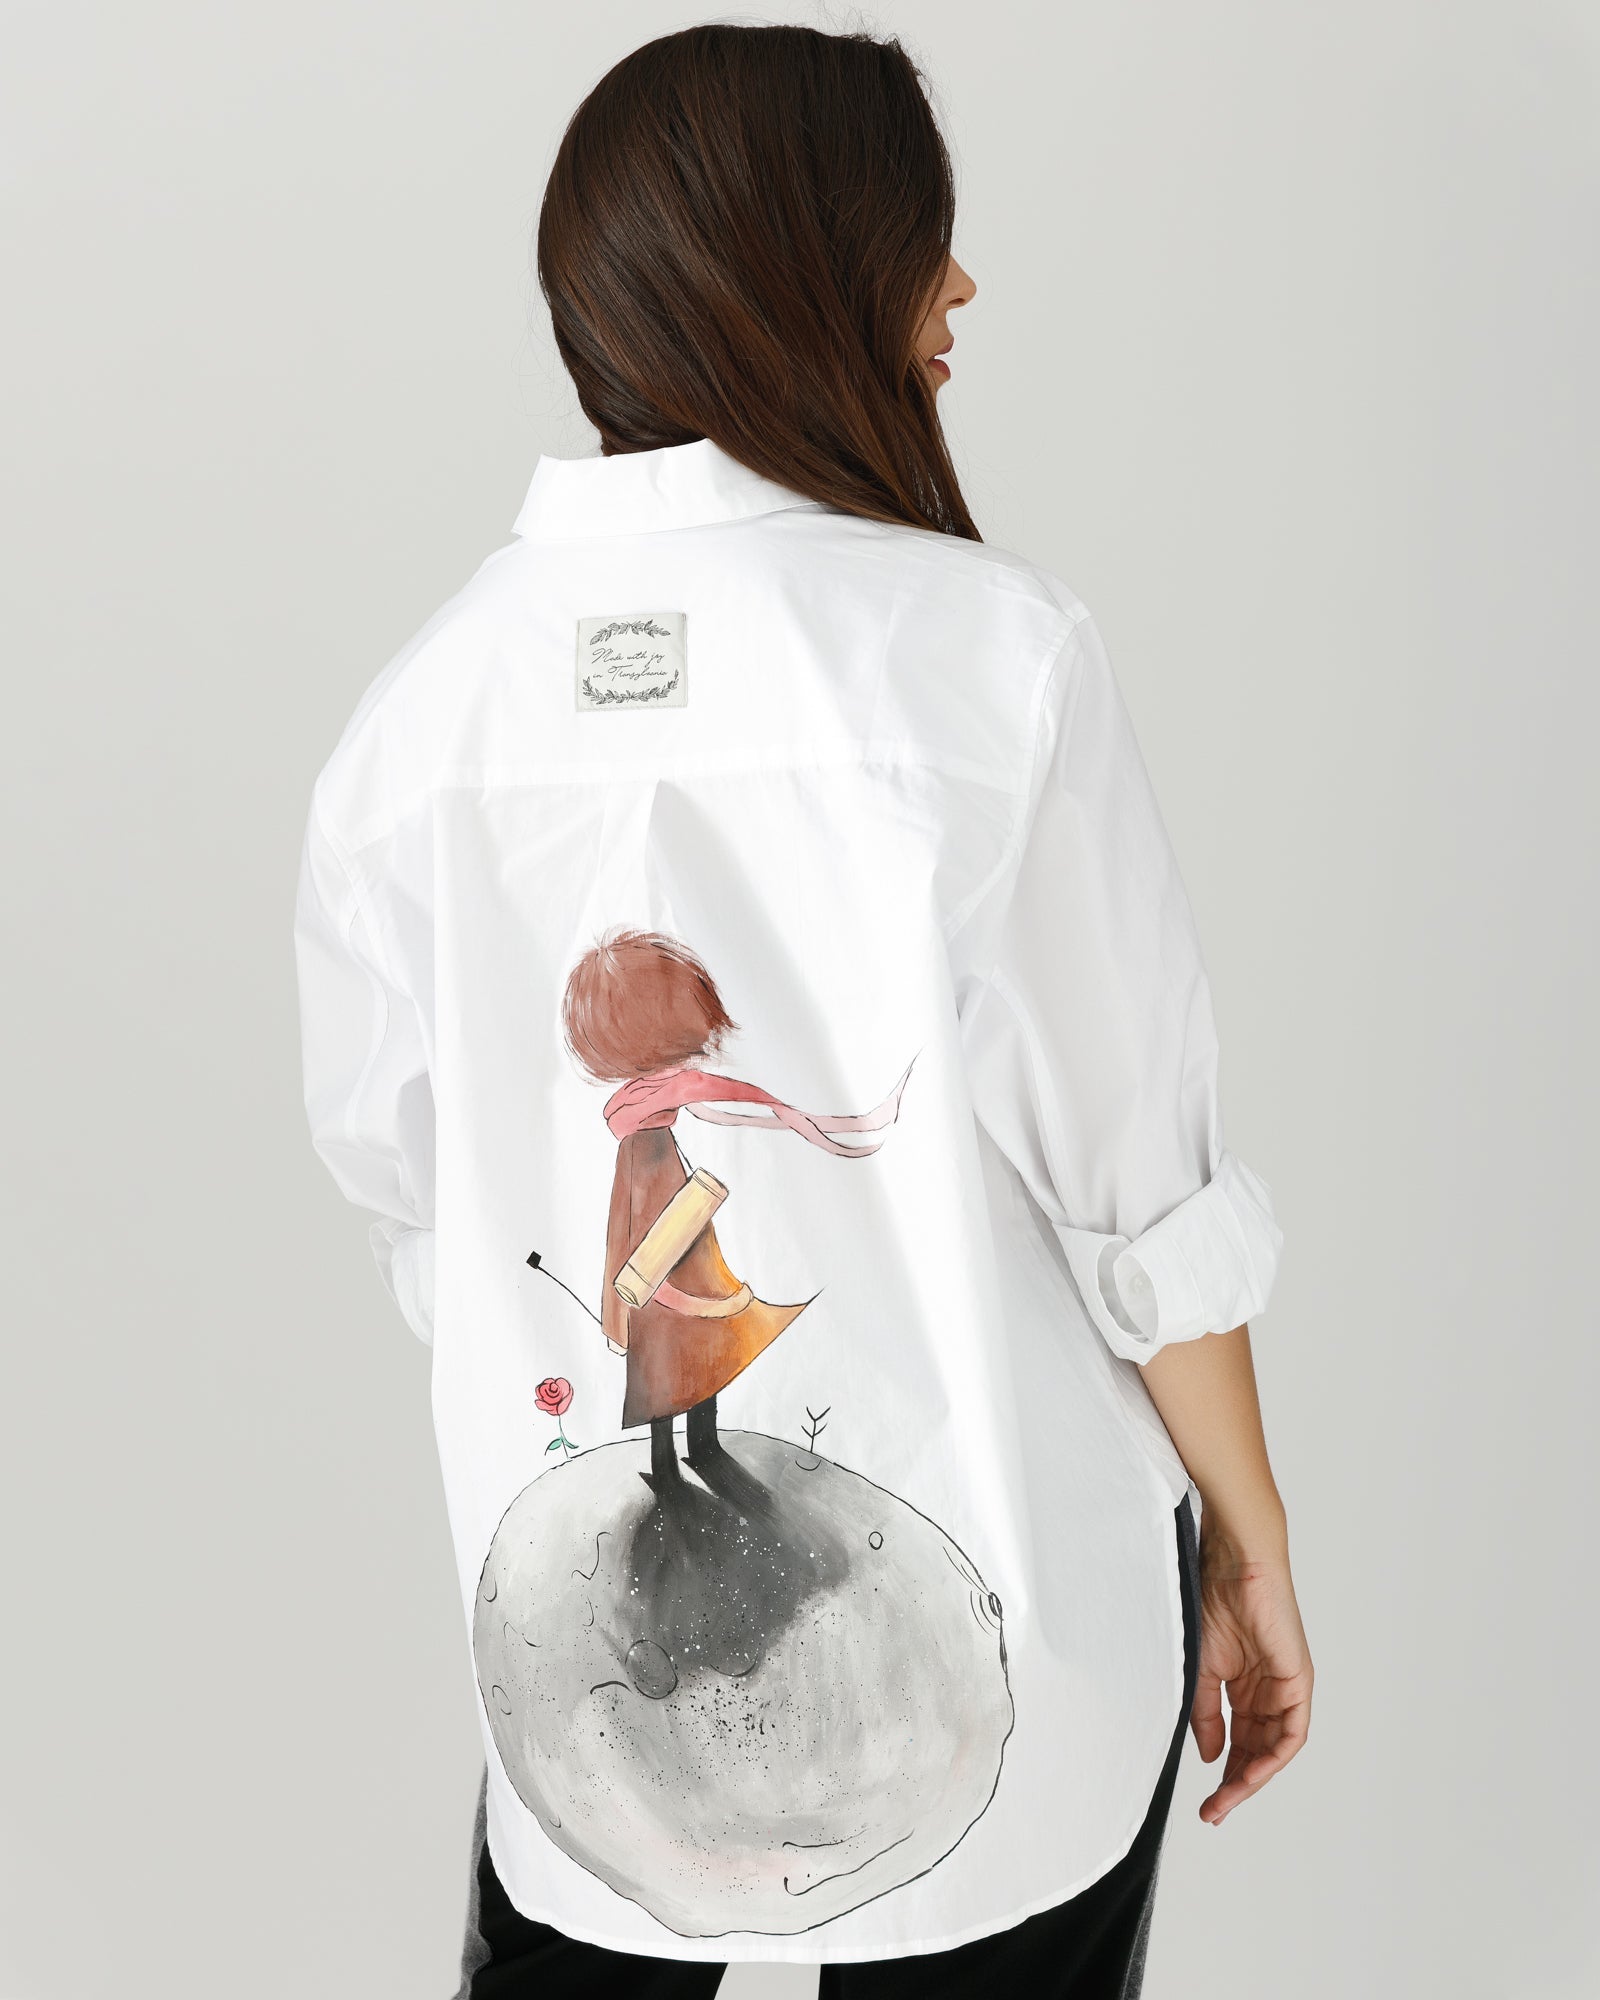 Hand-painted "The Little Prince" women's shirt